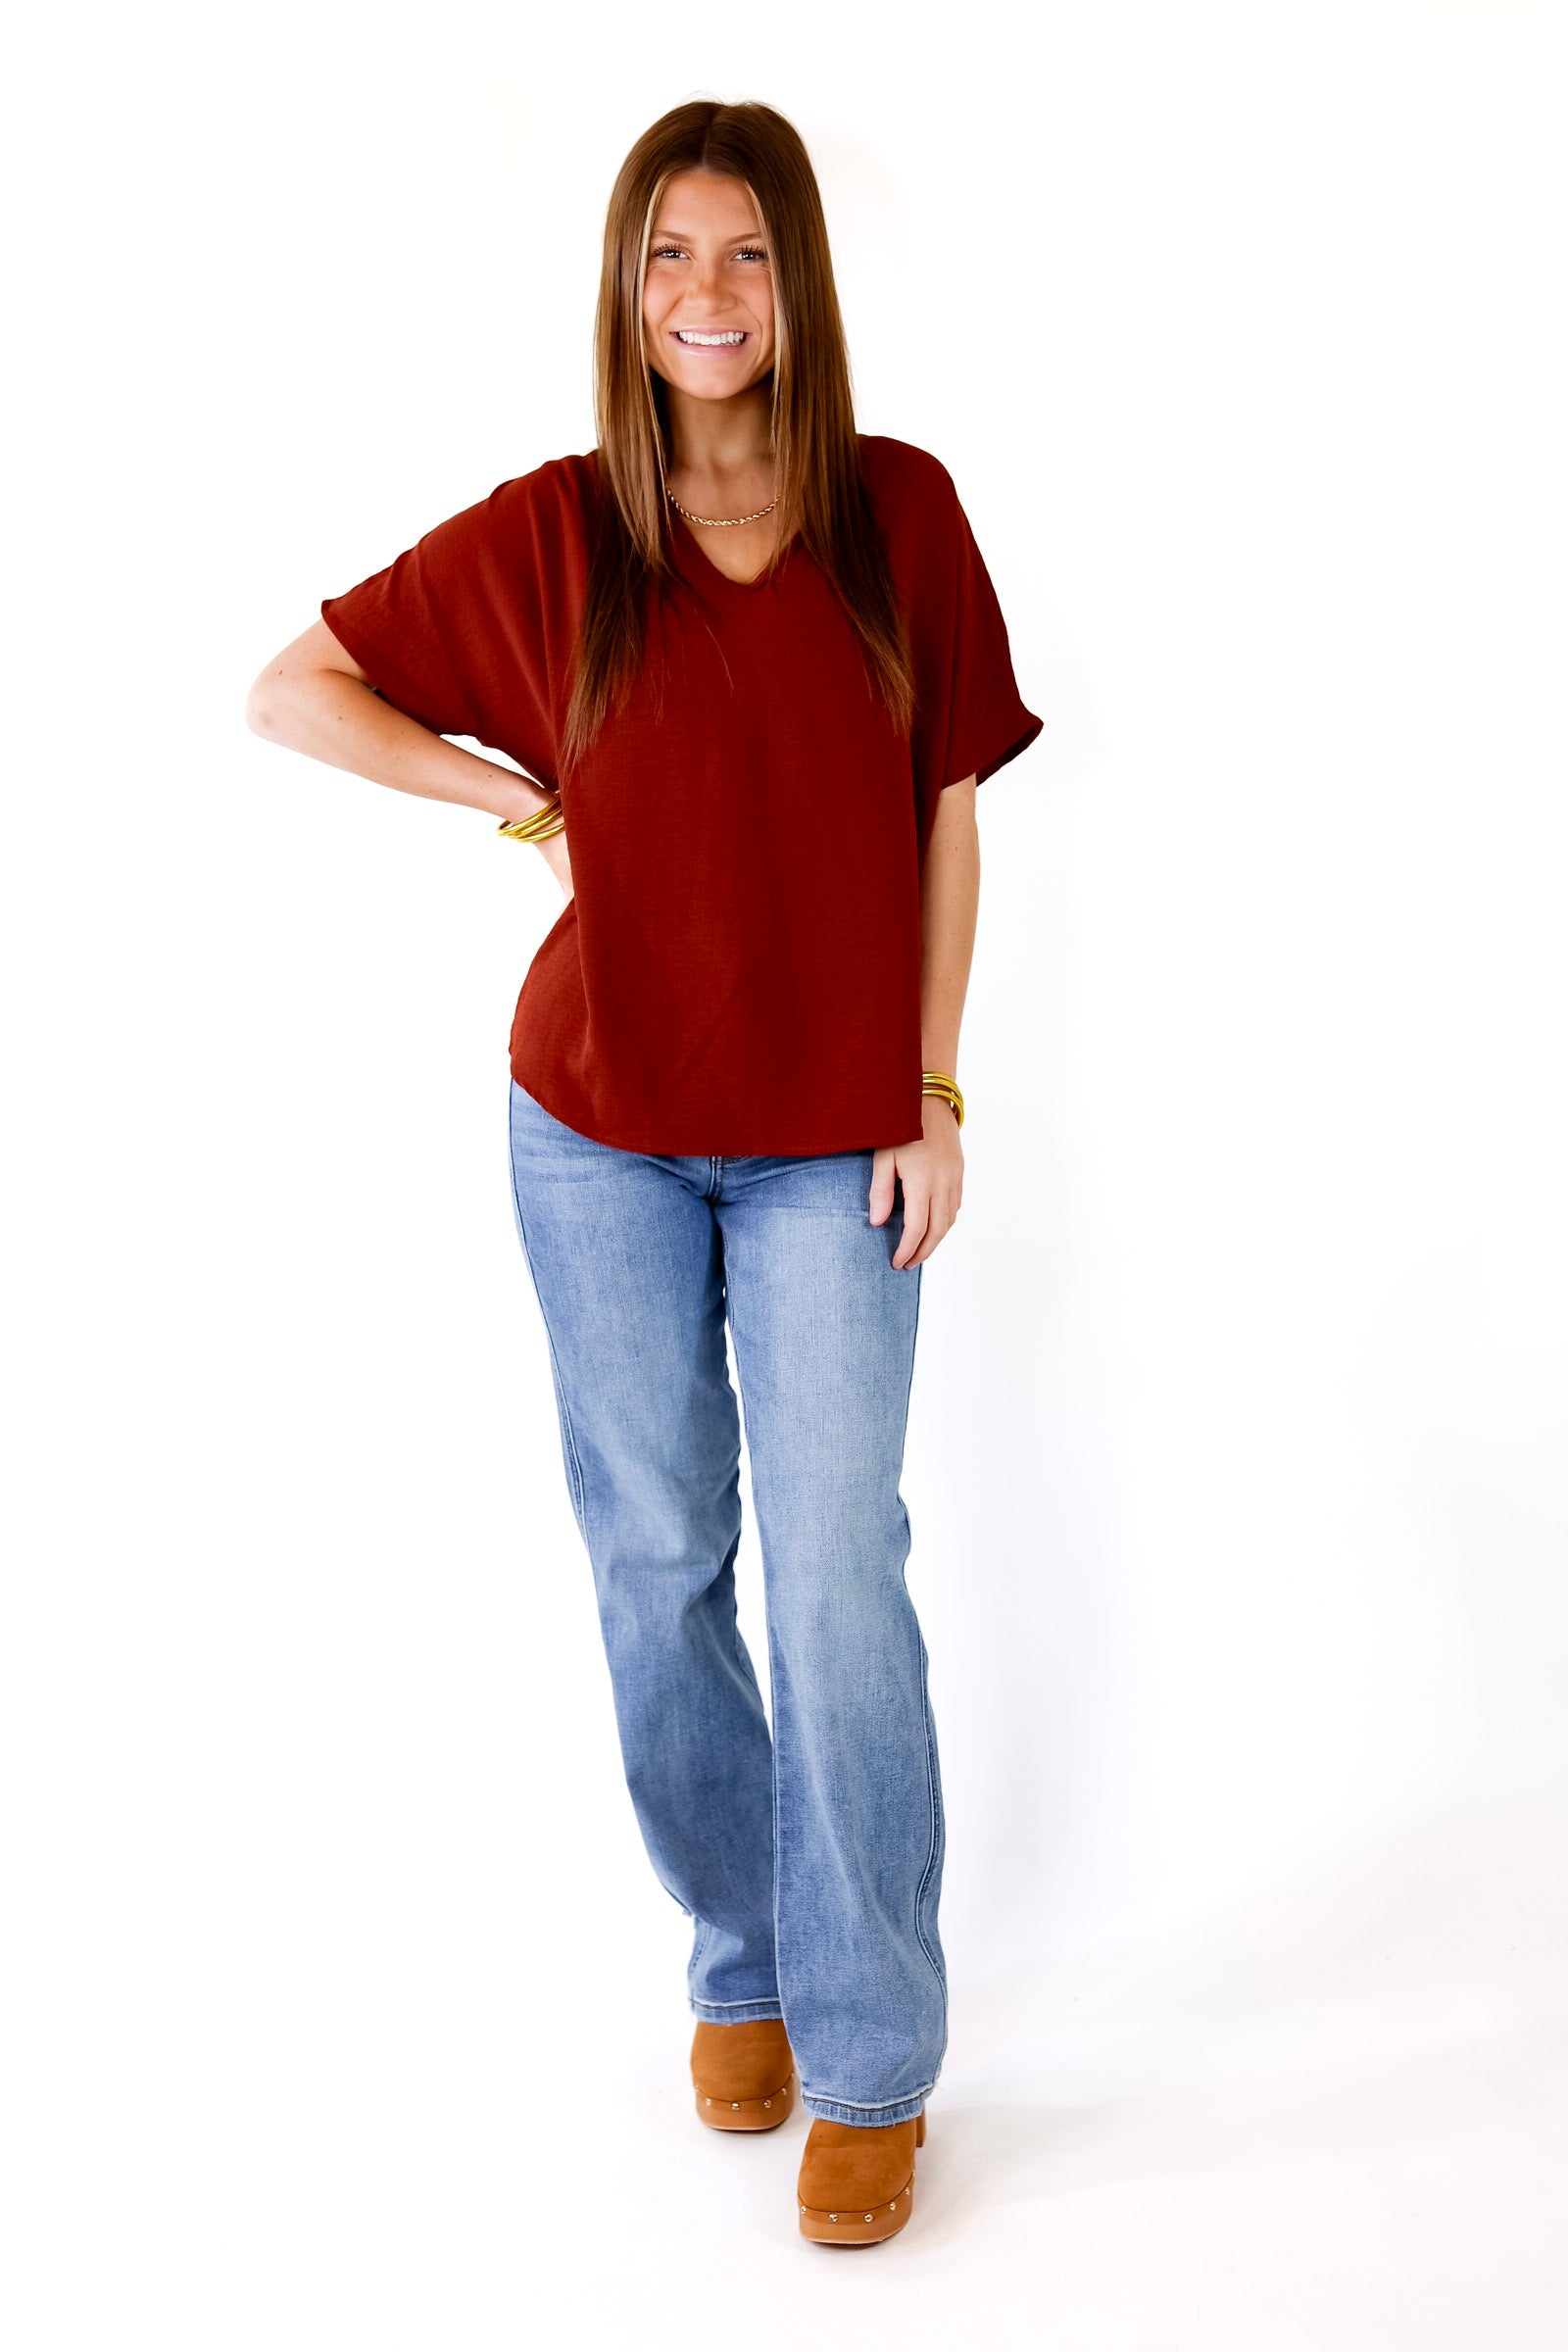 Lovely Dear V Neck Short Sleeve Solid Top in Rust Brown - Giddy Up Glamour Boutique